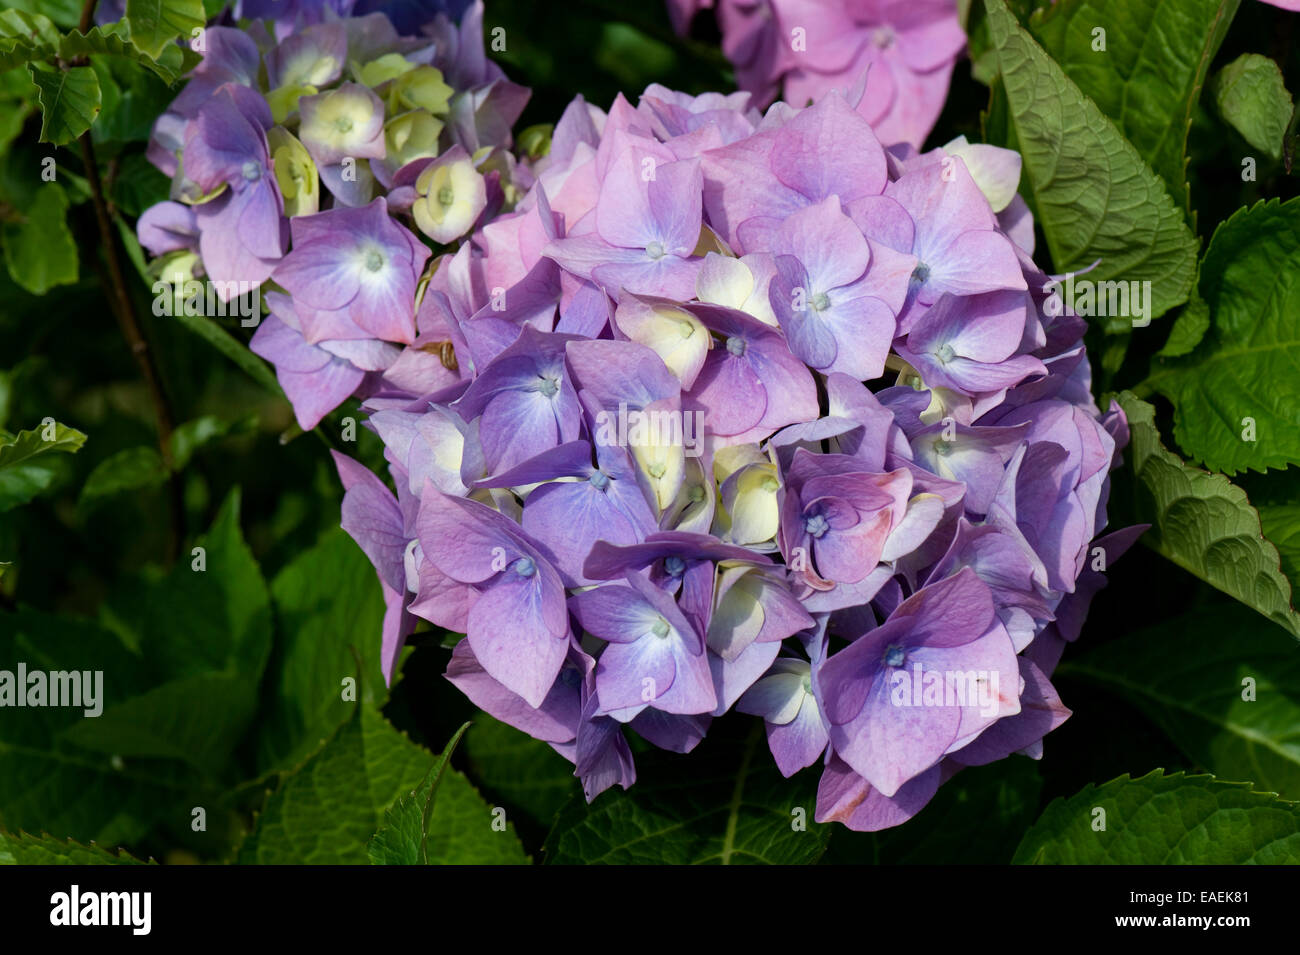 Blue/pink flowerhead of Hydrangea macrophylla where the marginal colour between red and blue is affected by soil pH conditions n Stock Photo